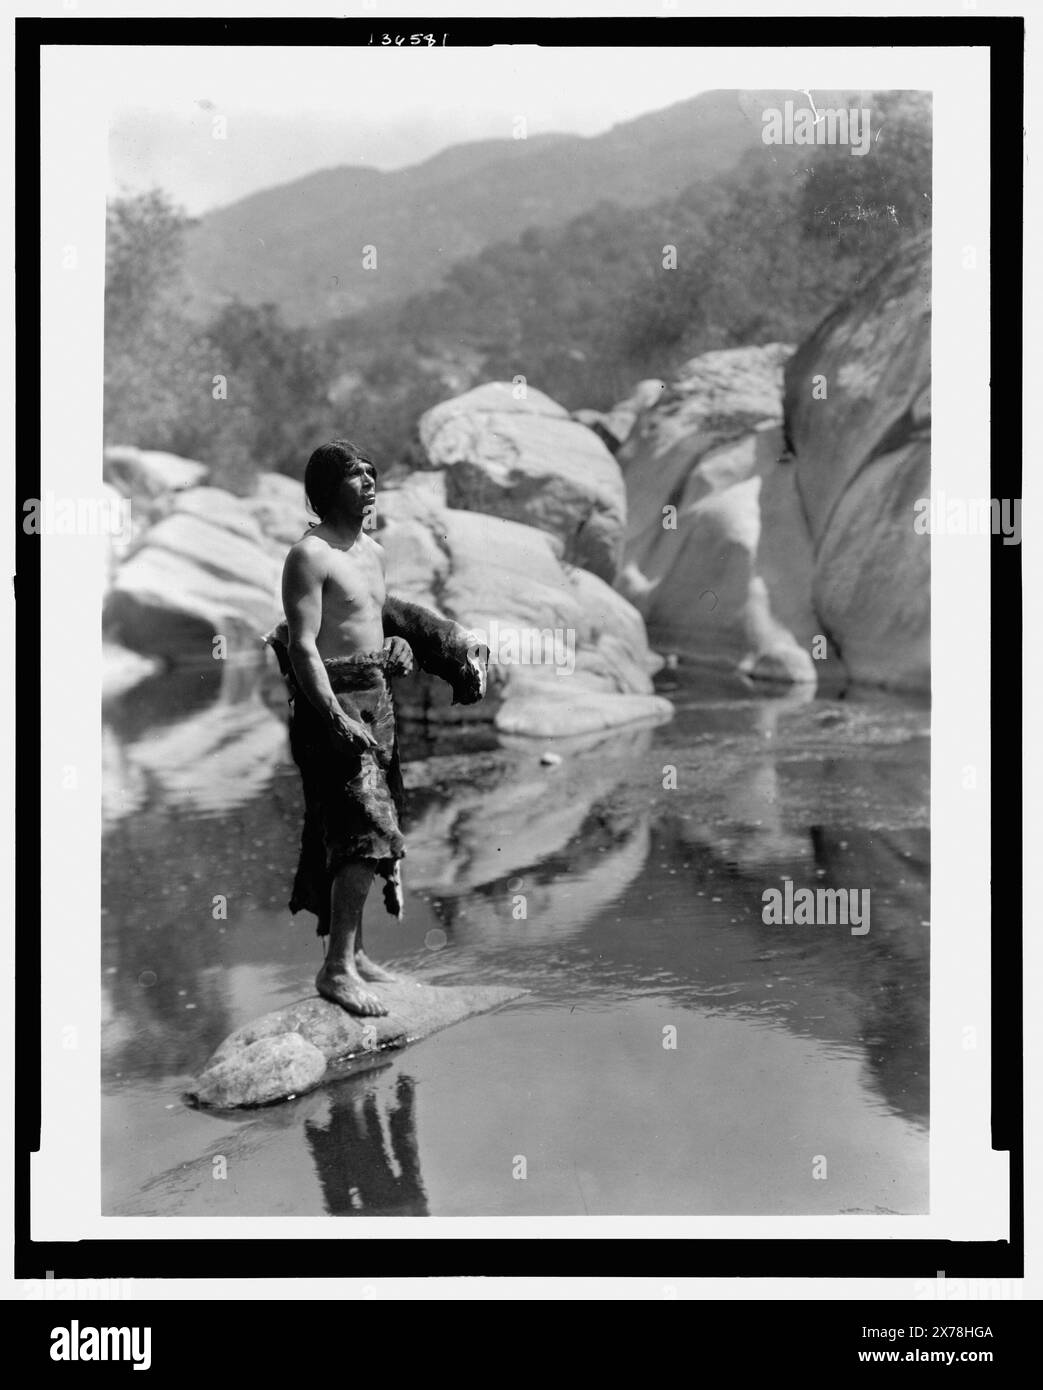 Quiet waters Tule River Reservation Yokuts, Title from item., Curtis no. 3959., Forms part of: Edward S. Curtis Collection ., Published in: The North American Indian / Edward S. Curtis. [Seattle, Wash.] : Edward S. Curtis, 1907-30, Suppl. v. 14, pl. 506.. Indians of North America, 1920-1930. , Yokuts Indians, 1920-1930. Stock Photo